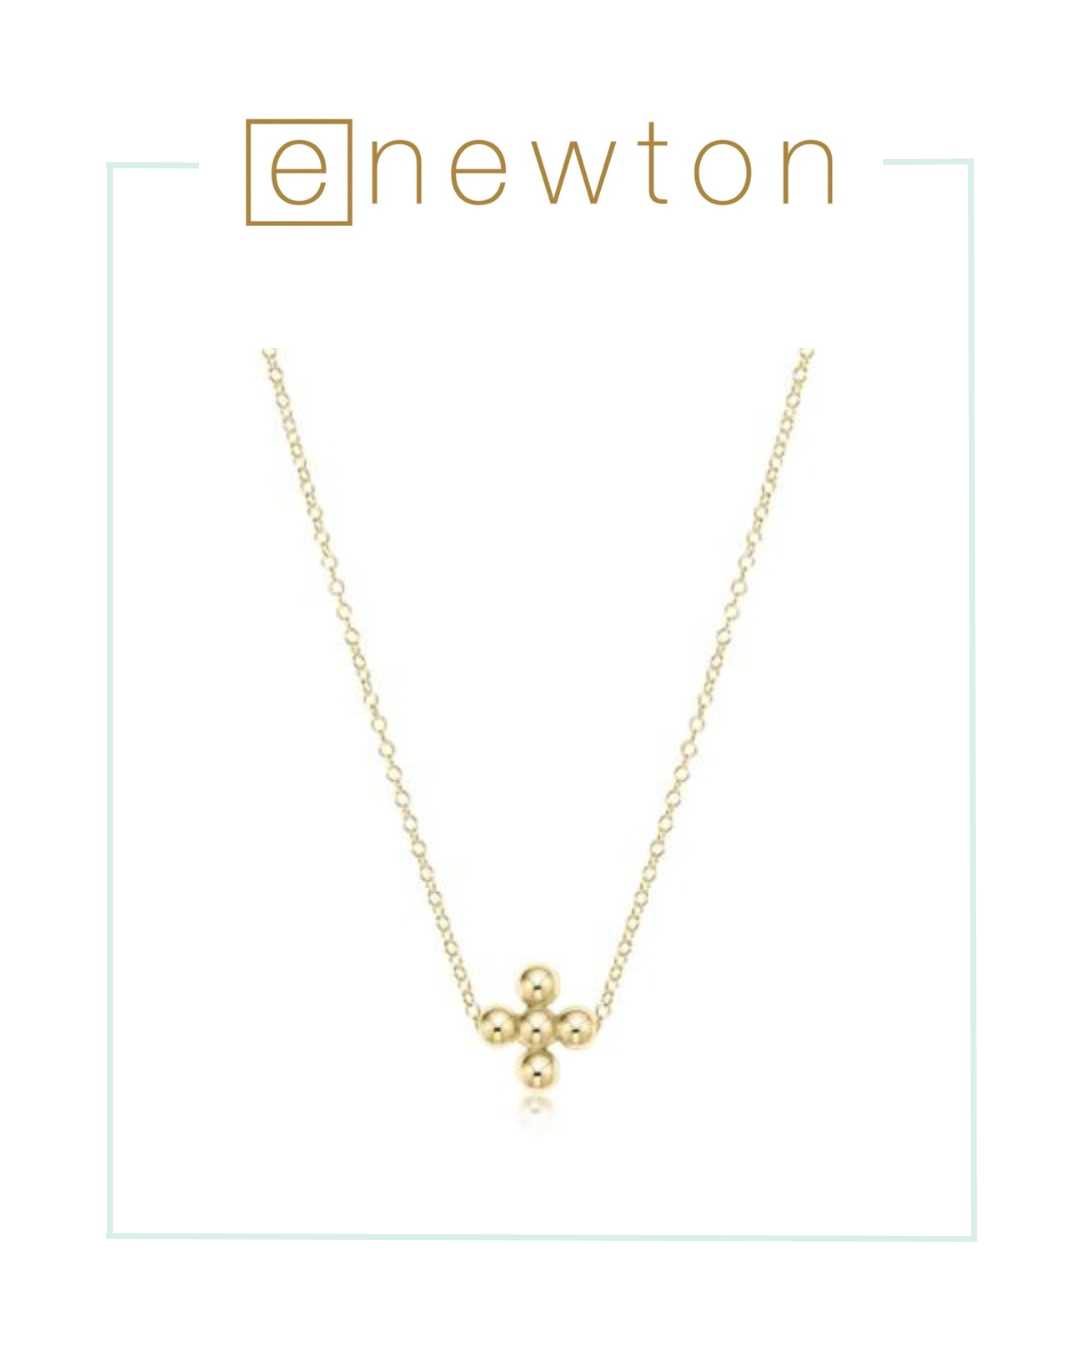 E Newton 16" Classic Beaded Signature Cross Necklace-Necklaces-ENEWTON-The Village Shoppe, Women’s Fashion Boutique, Shop Online and In Store - Located in Muscle Shoals, AL.